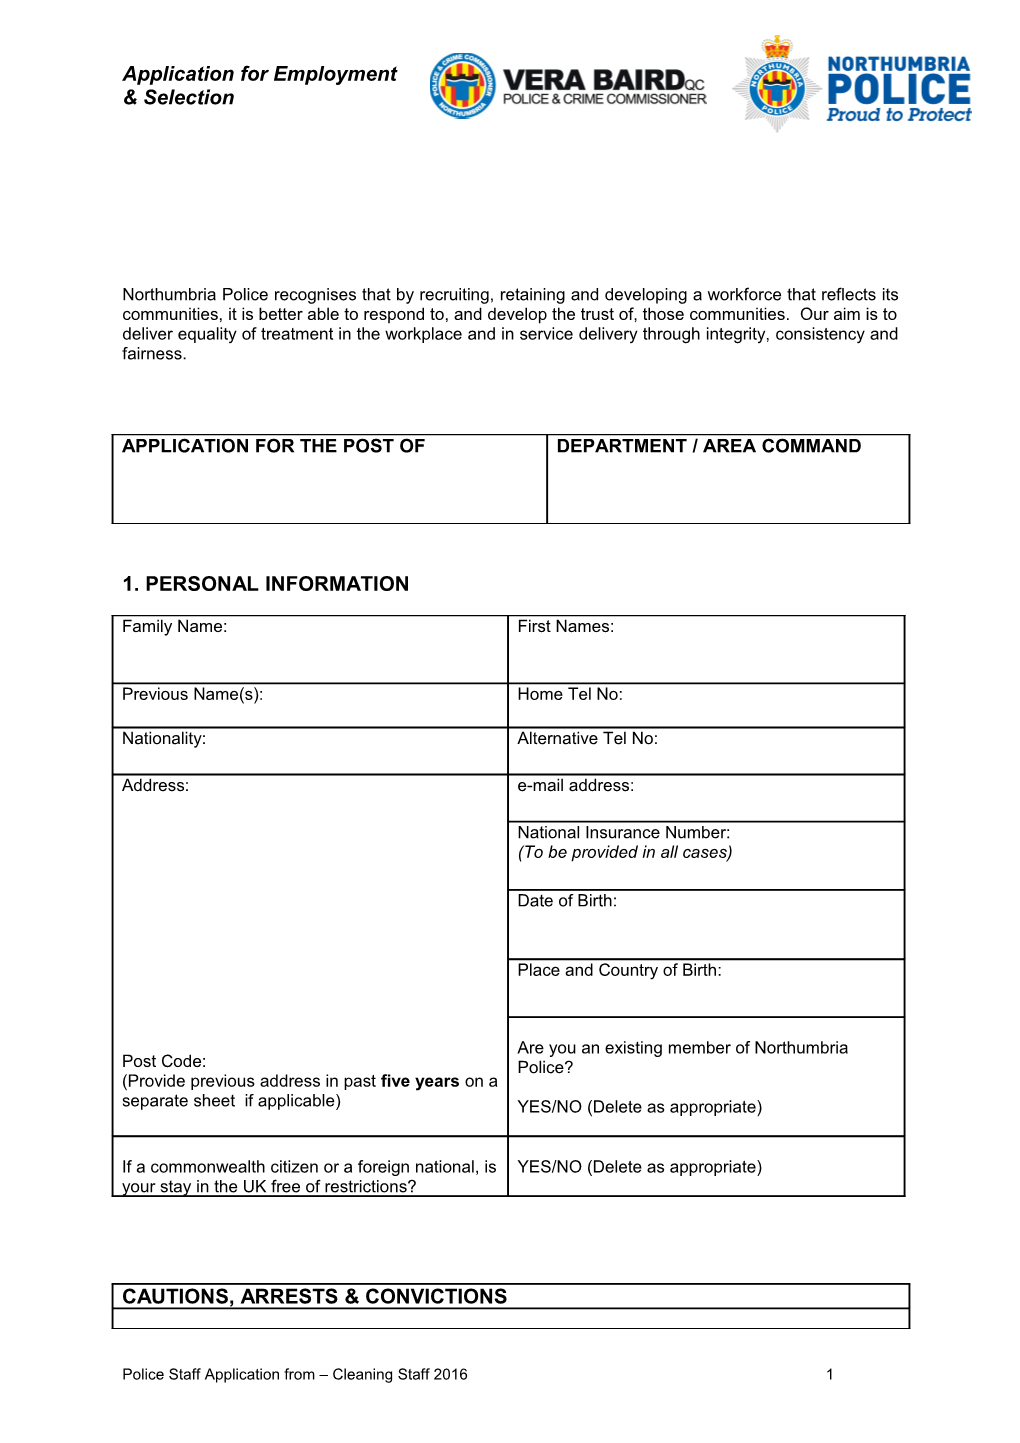 Application for Employment s121